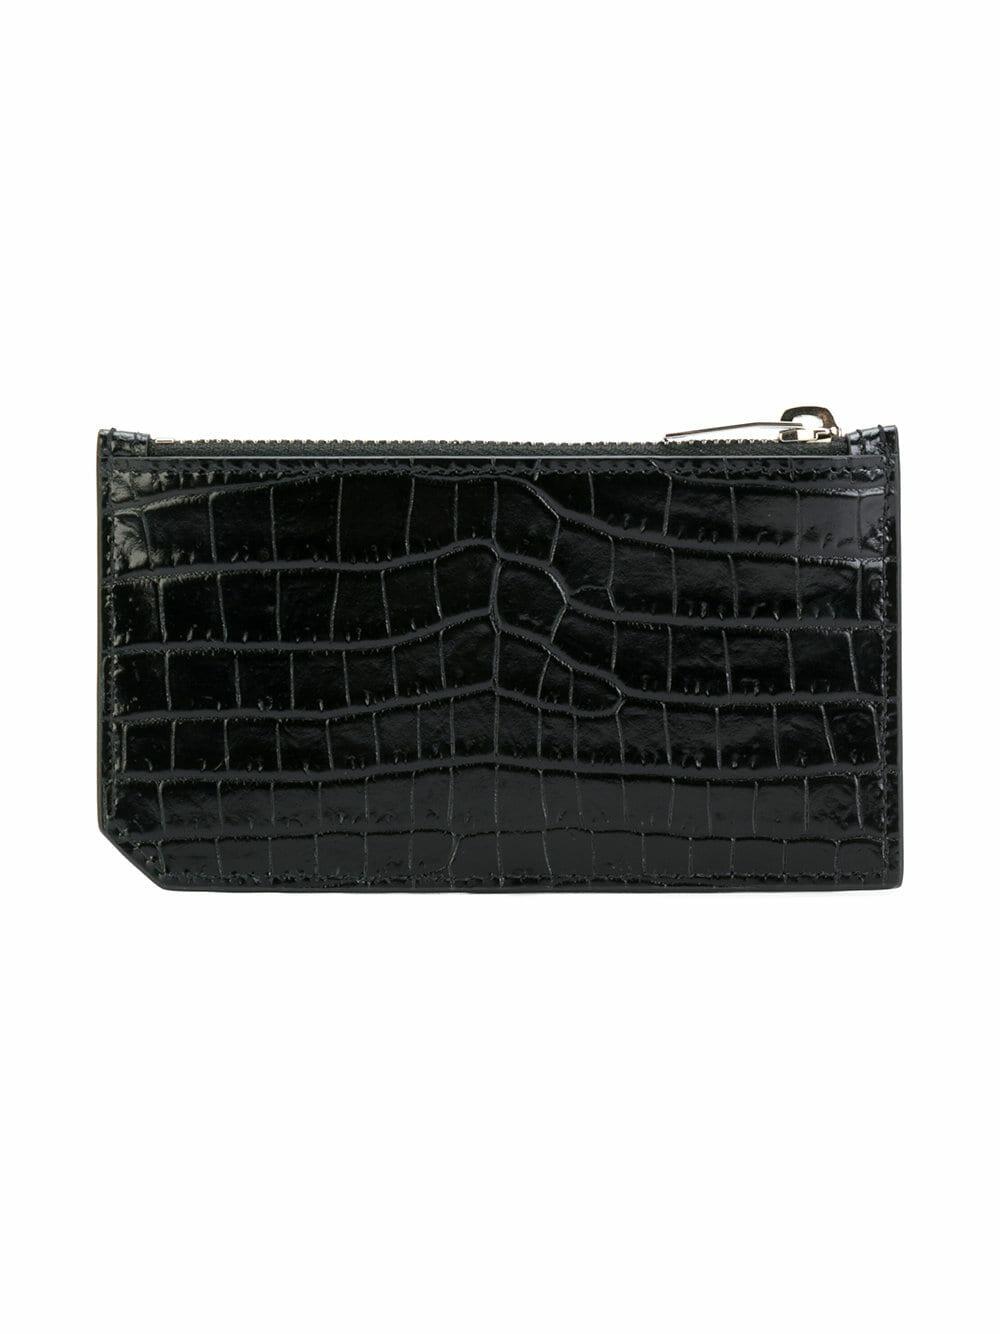 Saint Laurent Women's Black & Glitter Embossed Leather Envelope Wallet | by Mitchell Stores